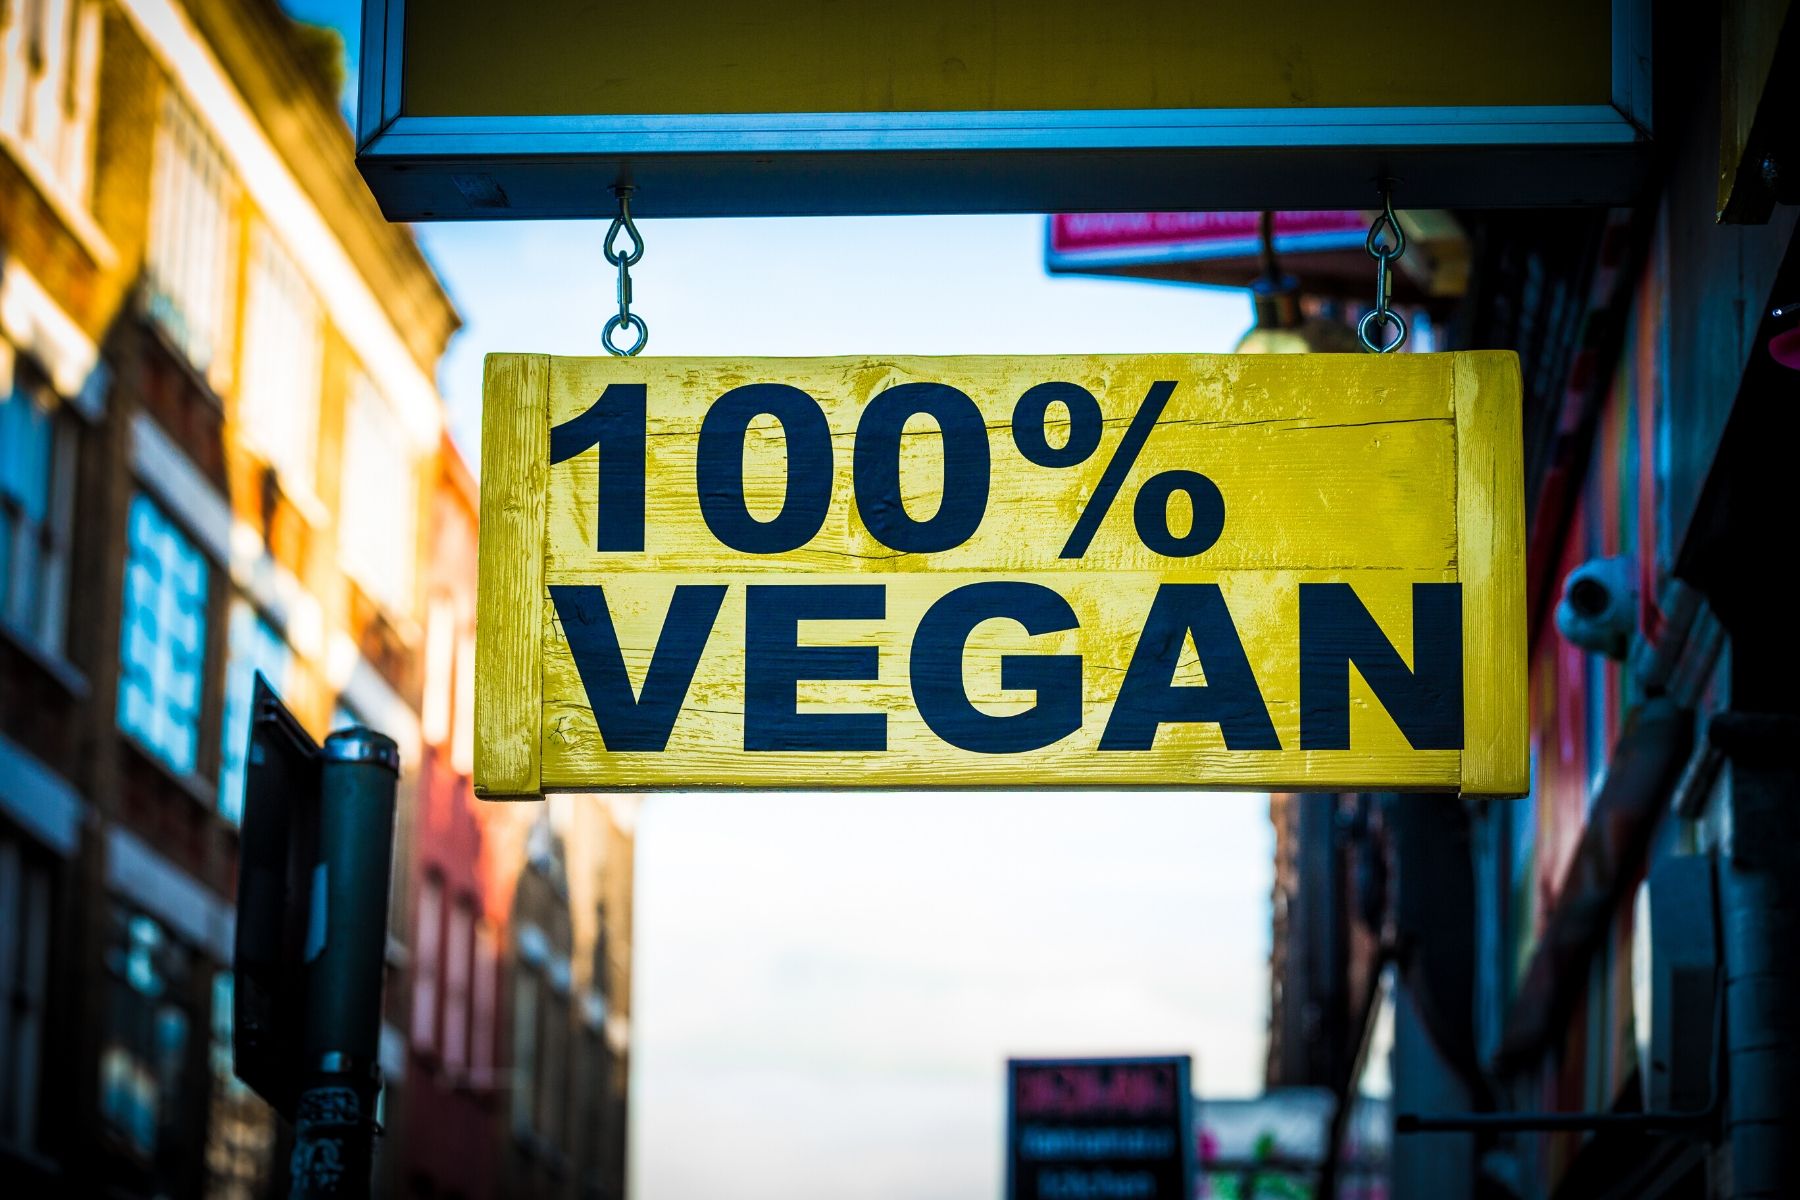 Why Are So Many People Embracing a Plant-Based Diet?